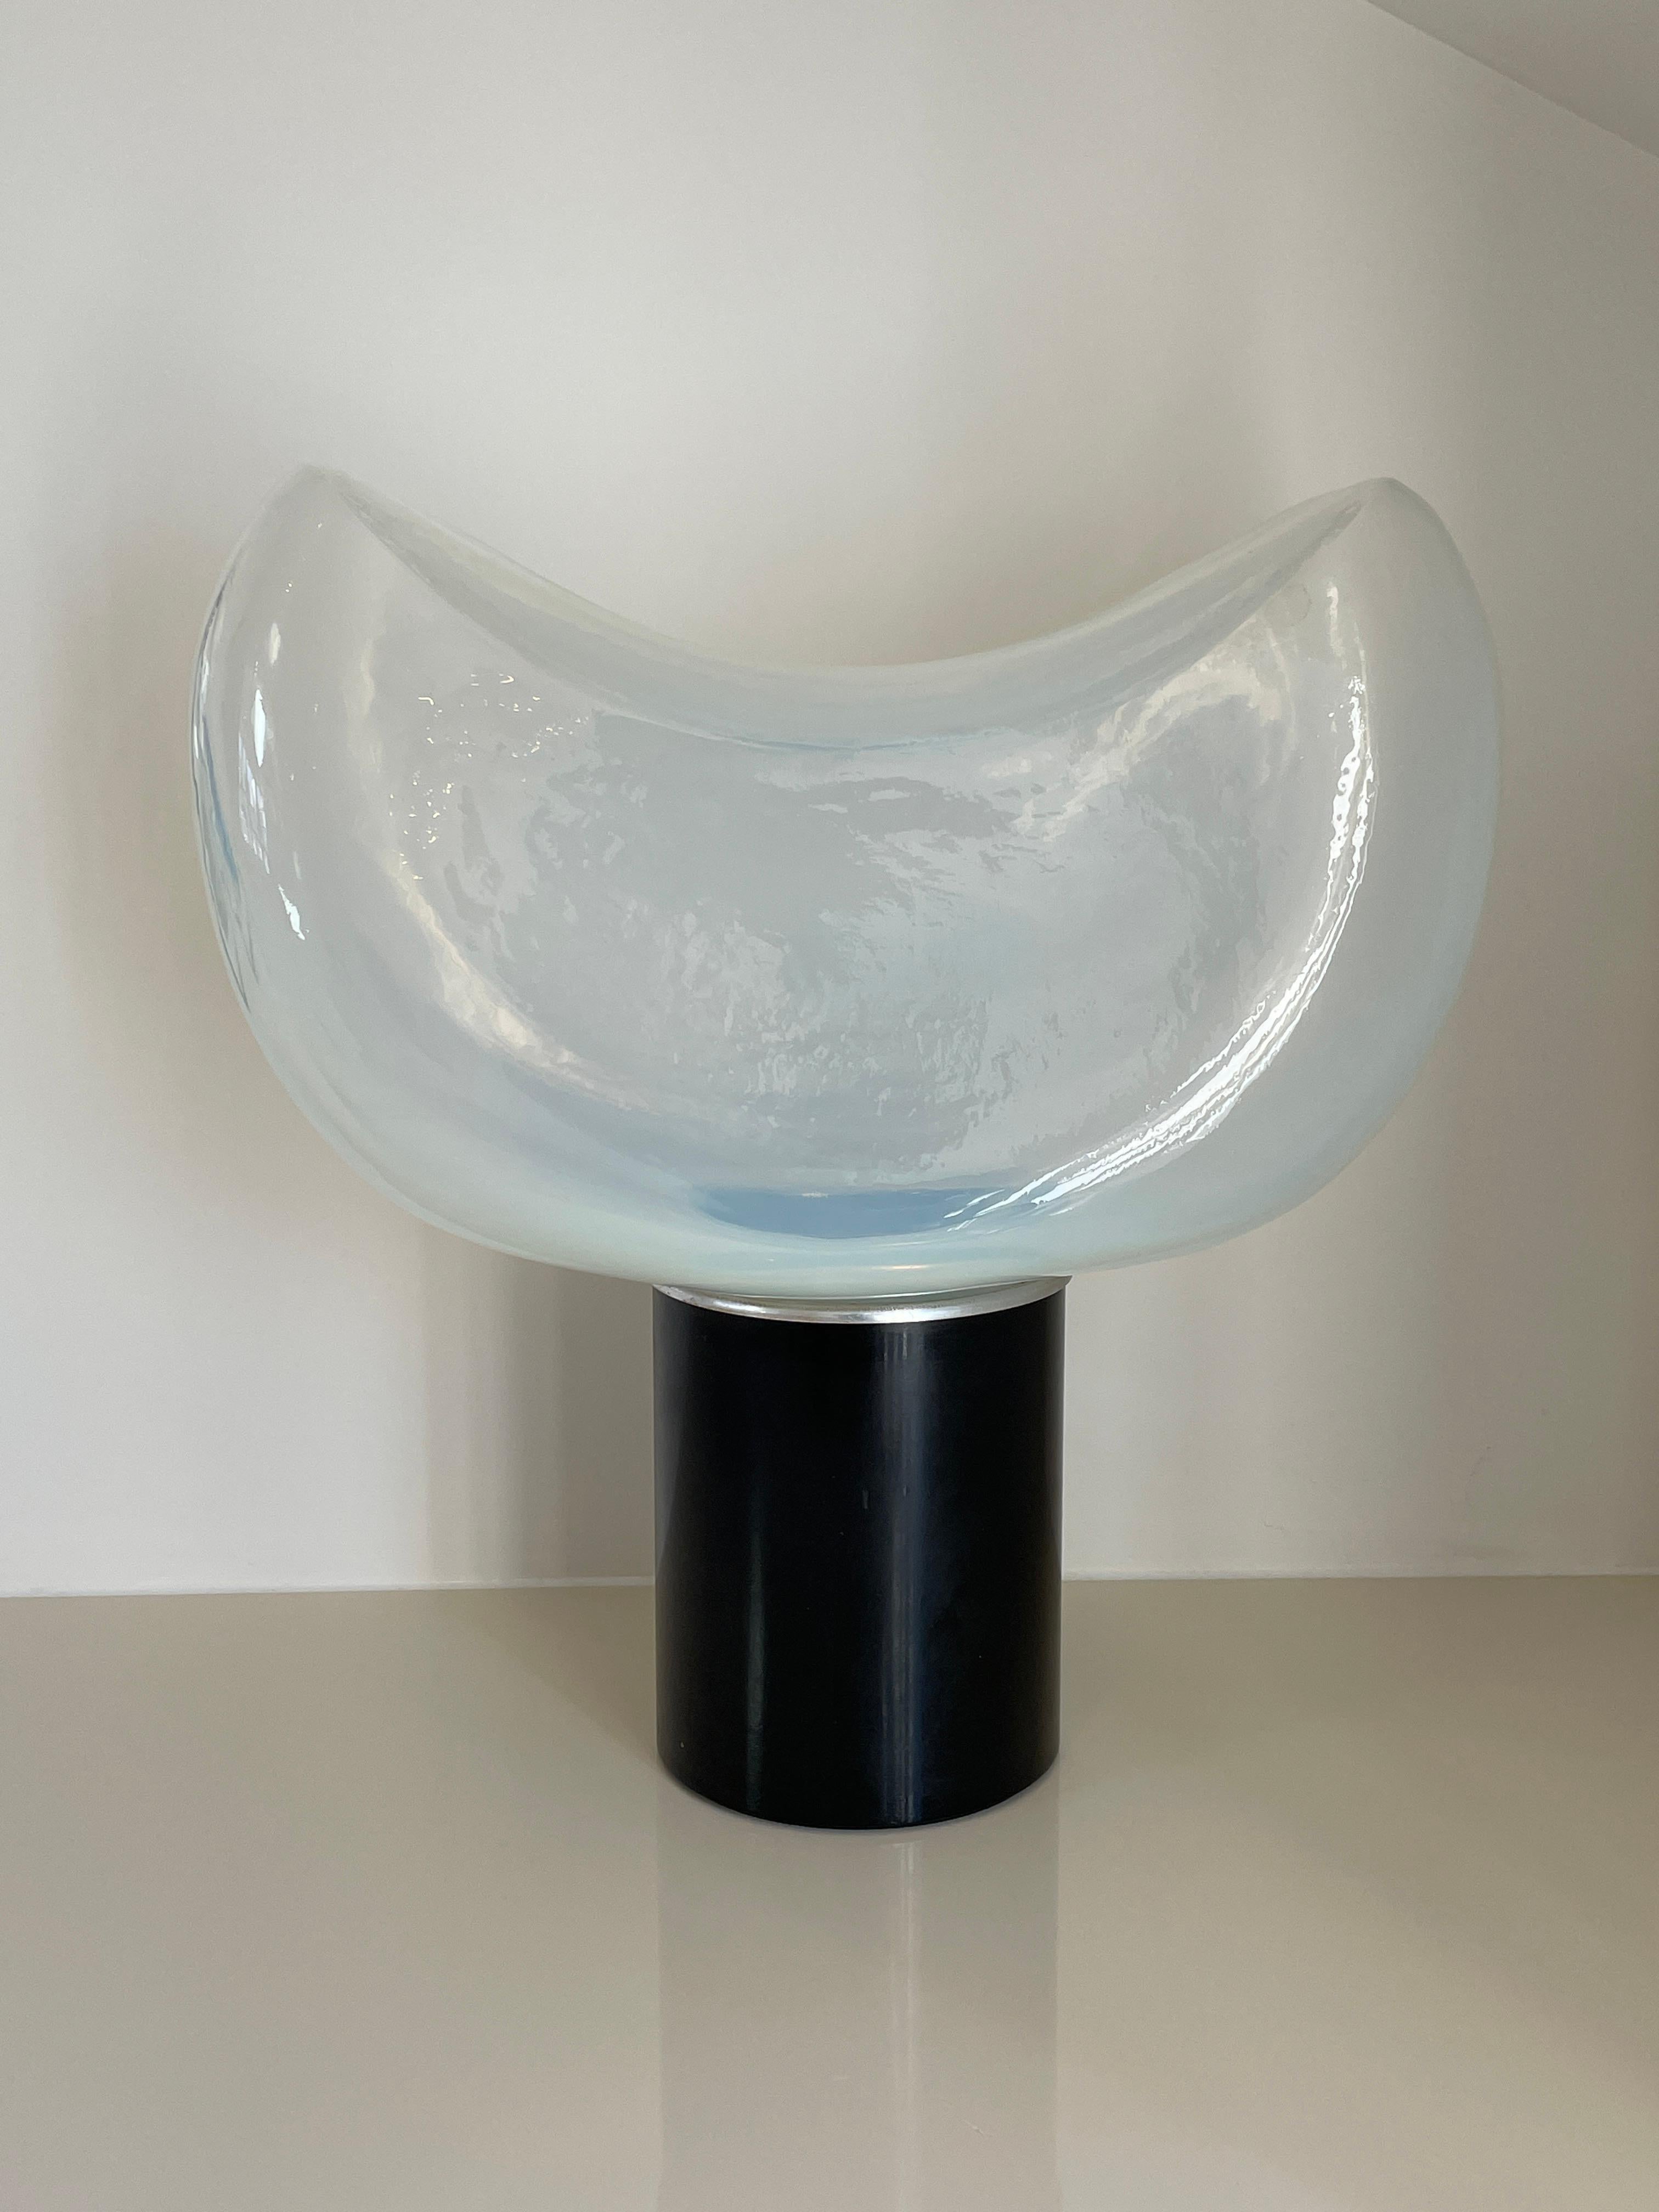 Height: 52cm
Width: 50cm
Depth: 25cm

Designer: Roberto Pamio
Manufacturer: Leucos, Italy
Date: 1960s
Materials: Blown glass, metal

Description: On a cylindrical black metal base stands a sculptural light in the shape of this celestial yet modern